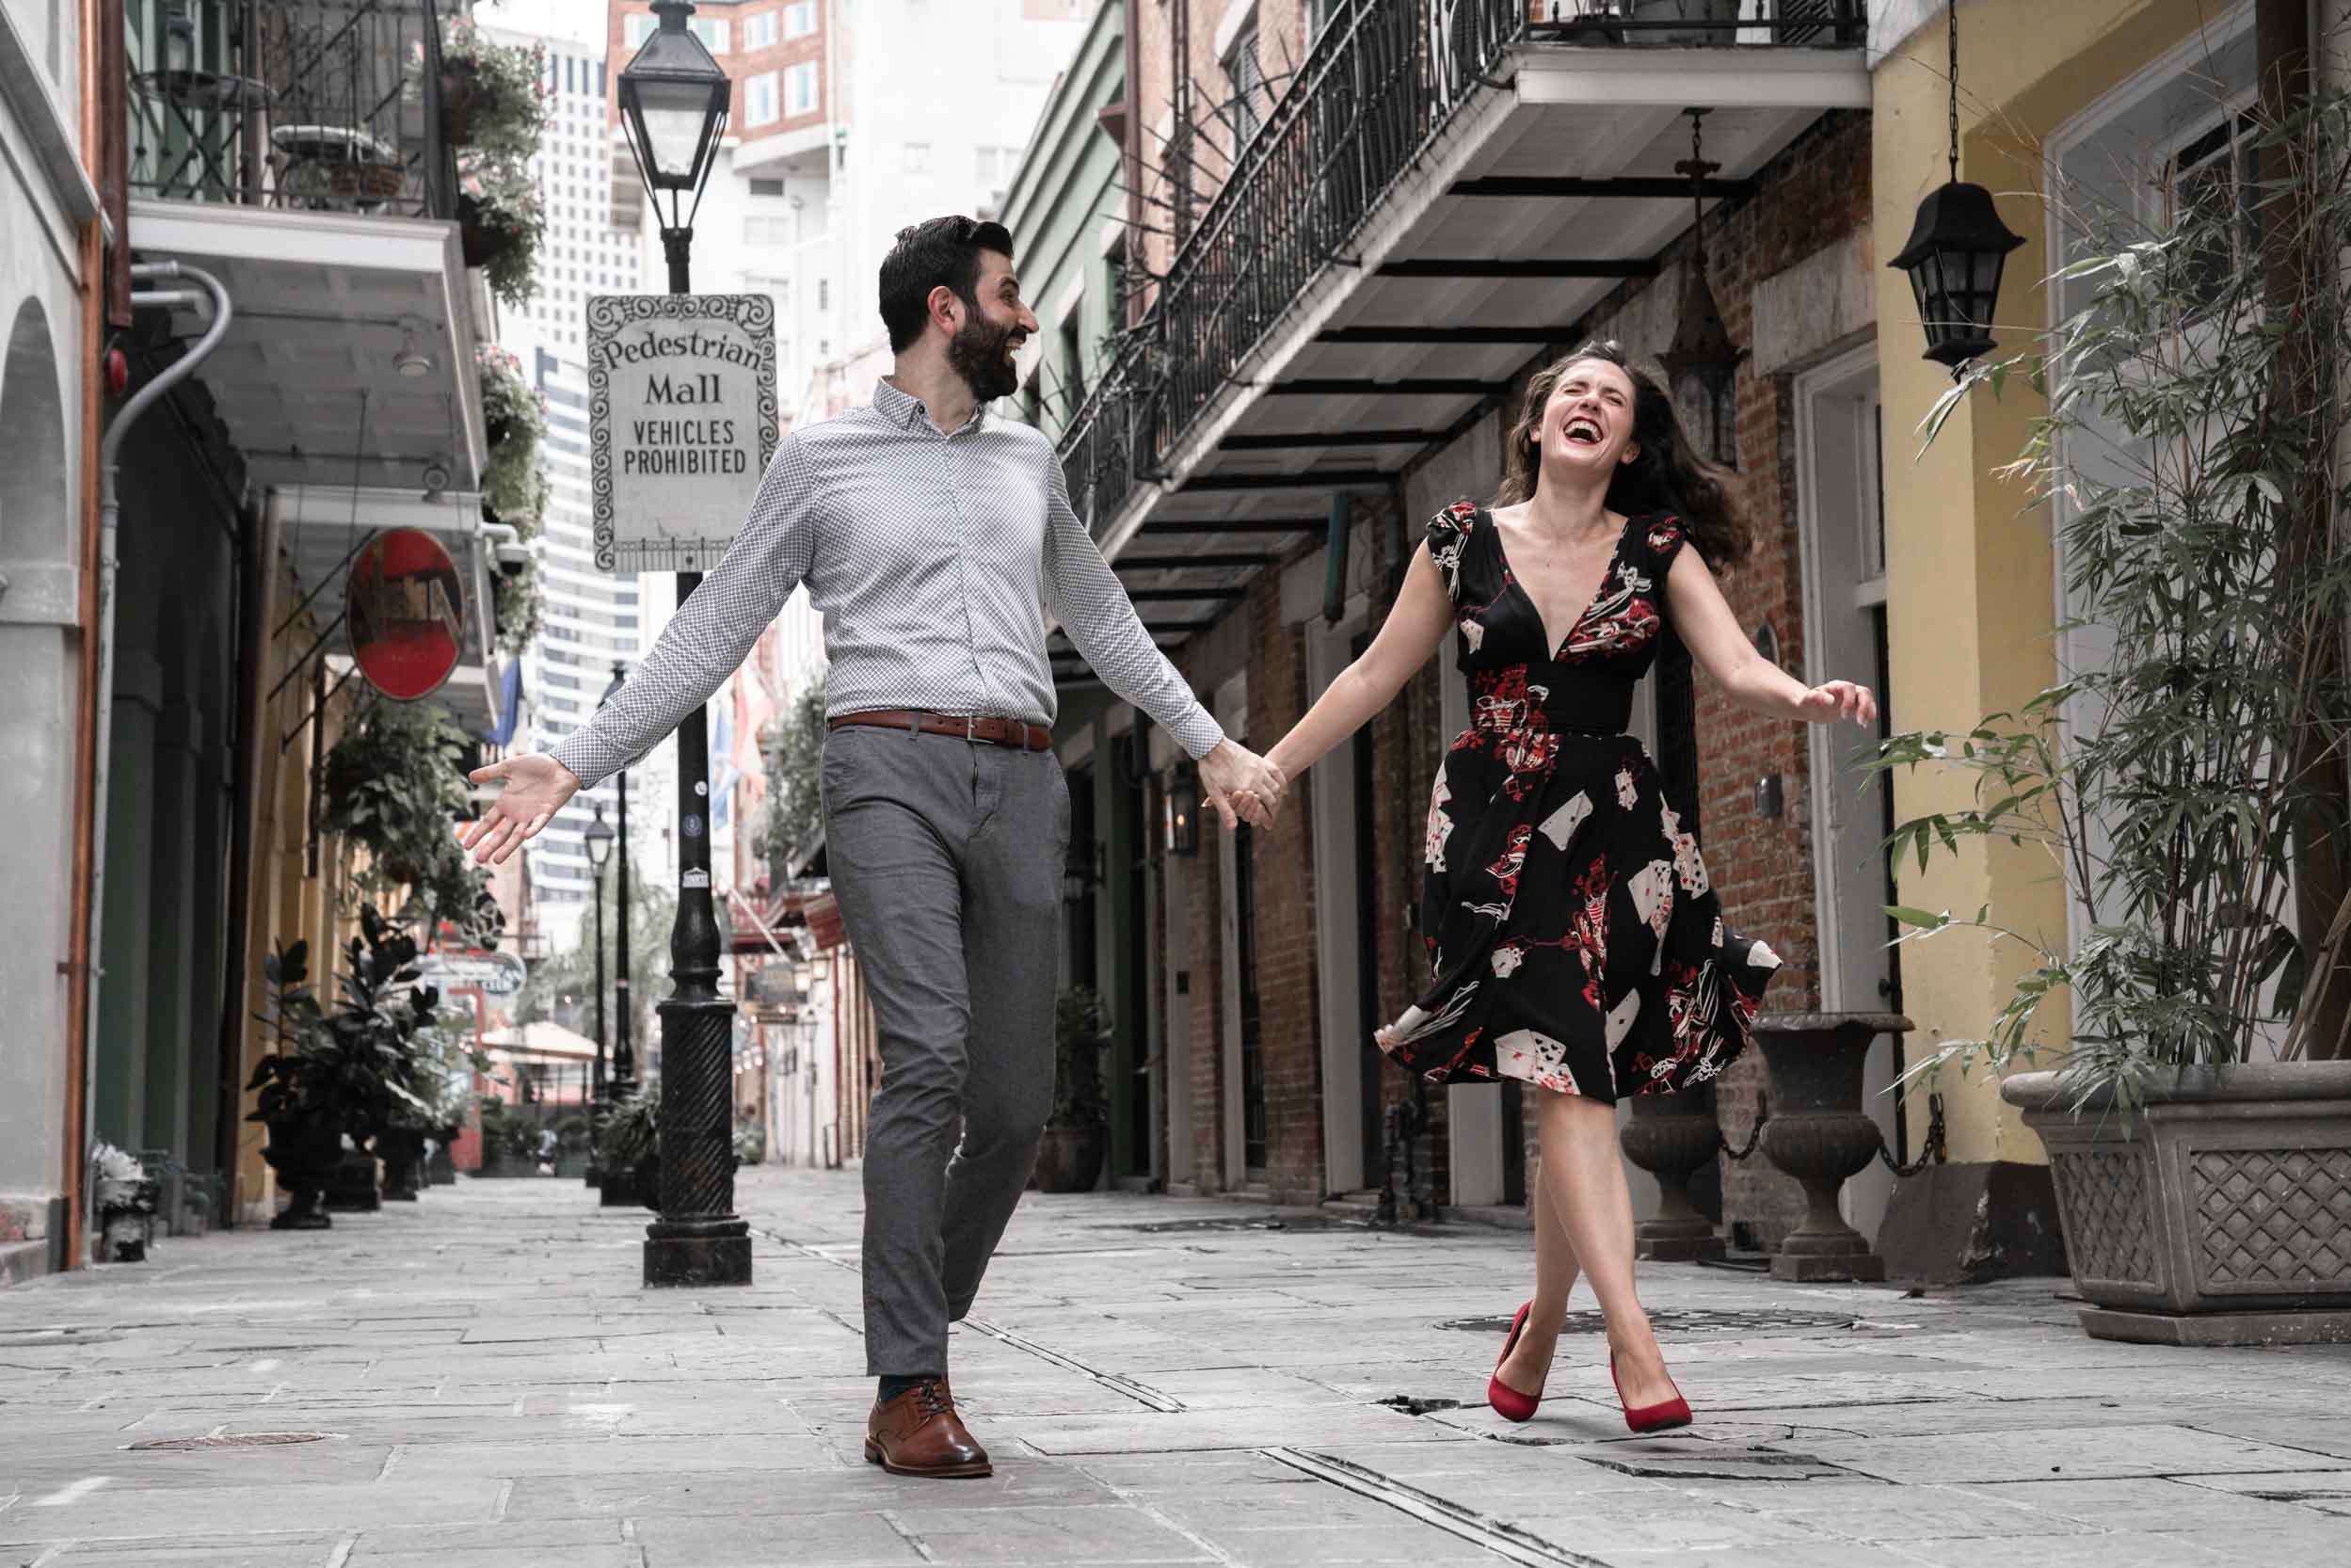 Romantic couple laughing and walking together in a New Orleans French Quarter alleyway